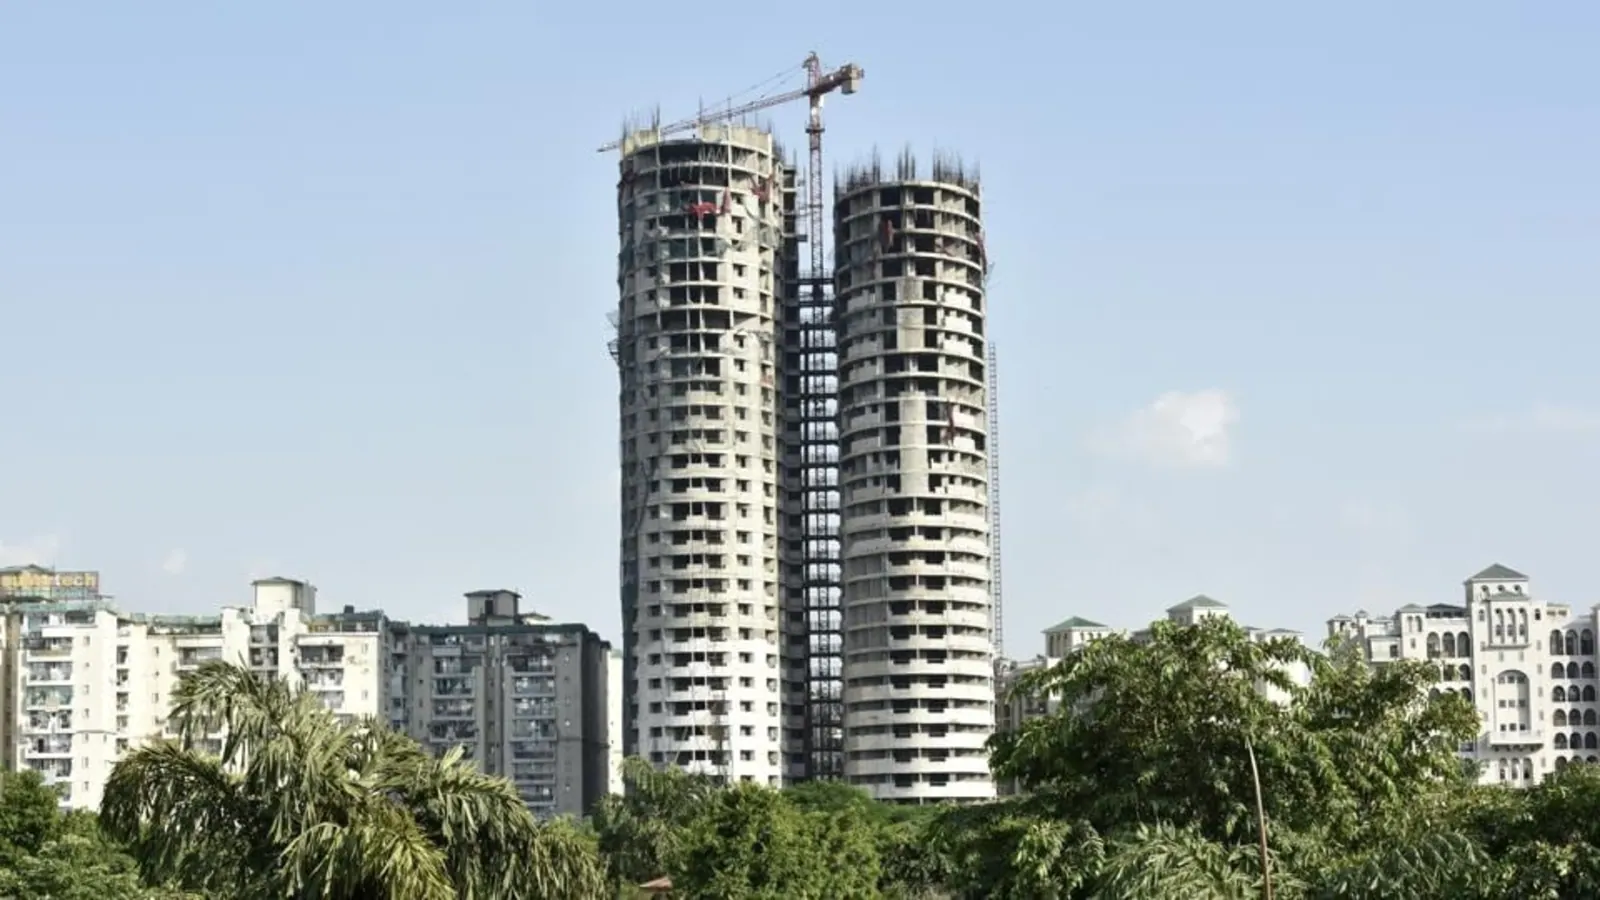 Noida Super Tech twin towers with explosives completed